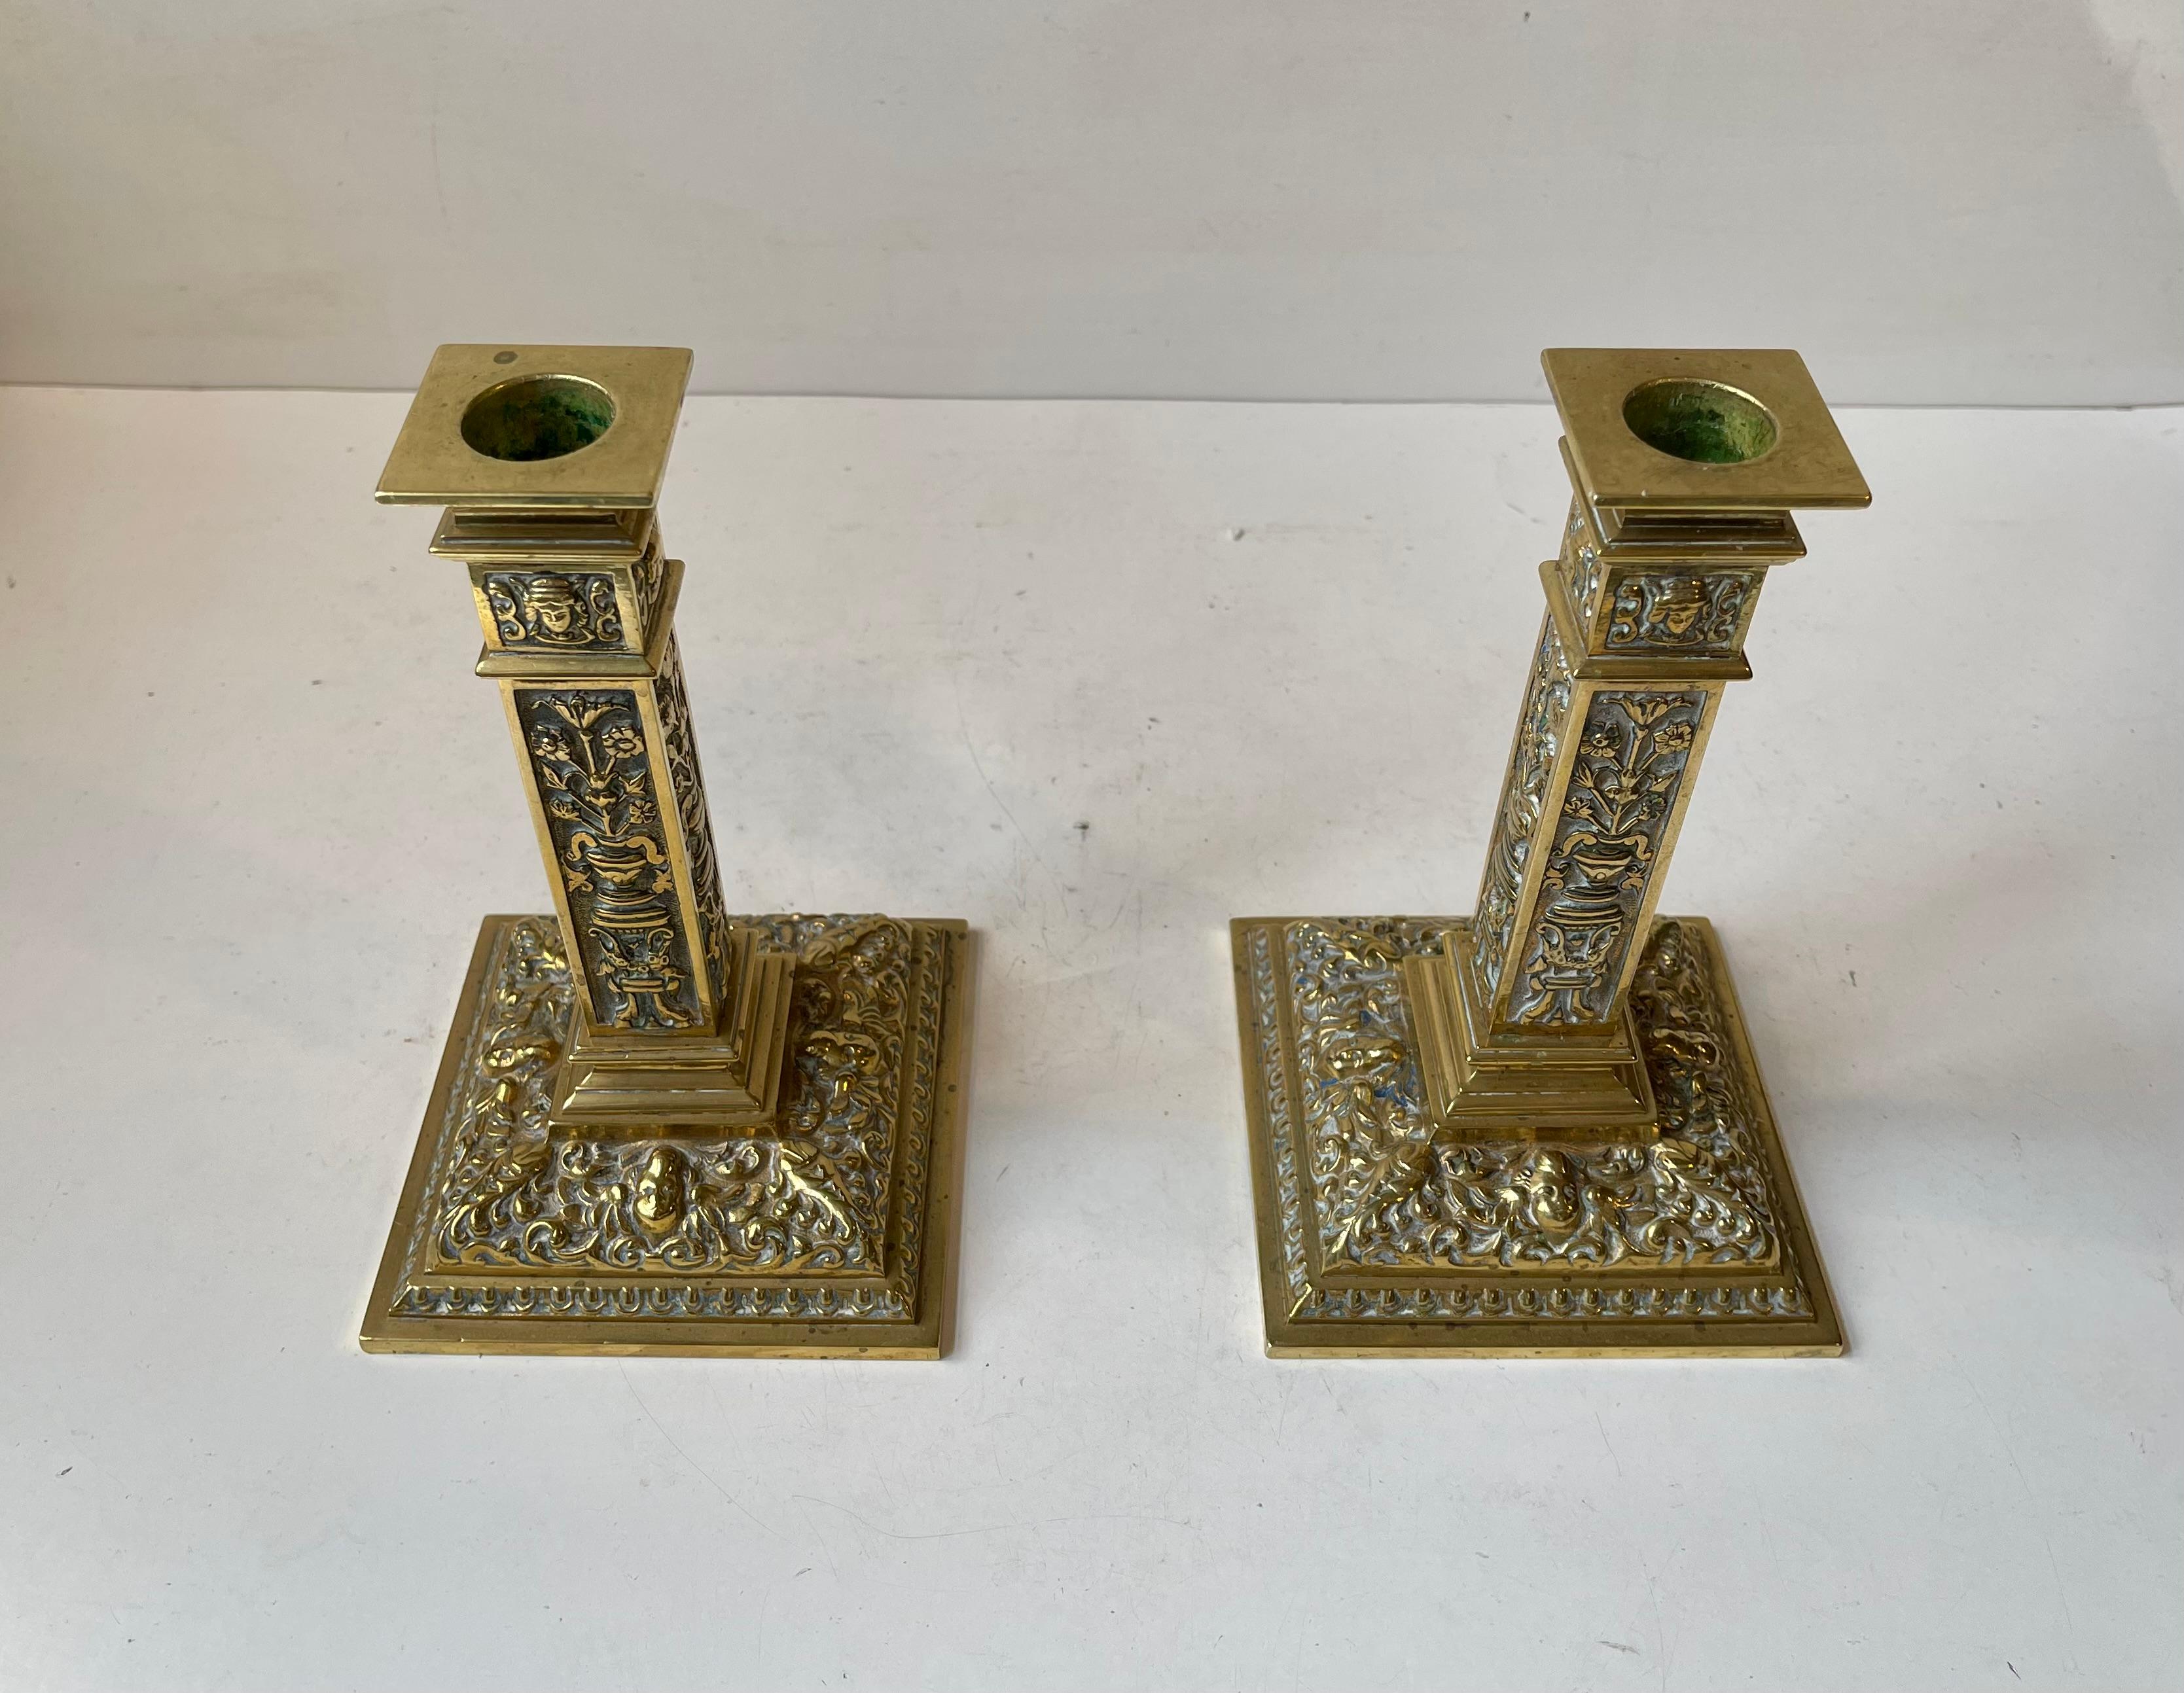 Pair of Rare Antique 19th Century Victorian Clarke's Gilt Ormolu Bronze candleholders. Neo-classical styling. Made by Samuel Clarke of Cricklewood in London circa 1880-1890 at the W. S. Foundry. Finely handmade English master craftmanship. Very